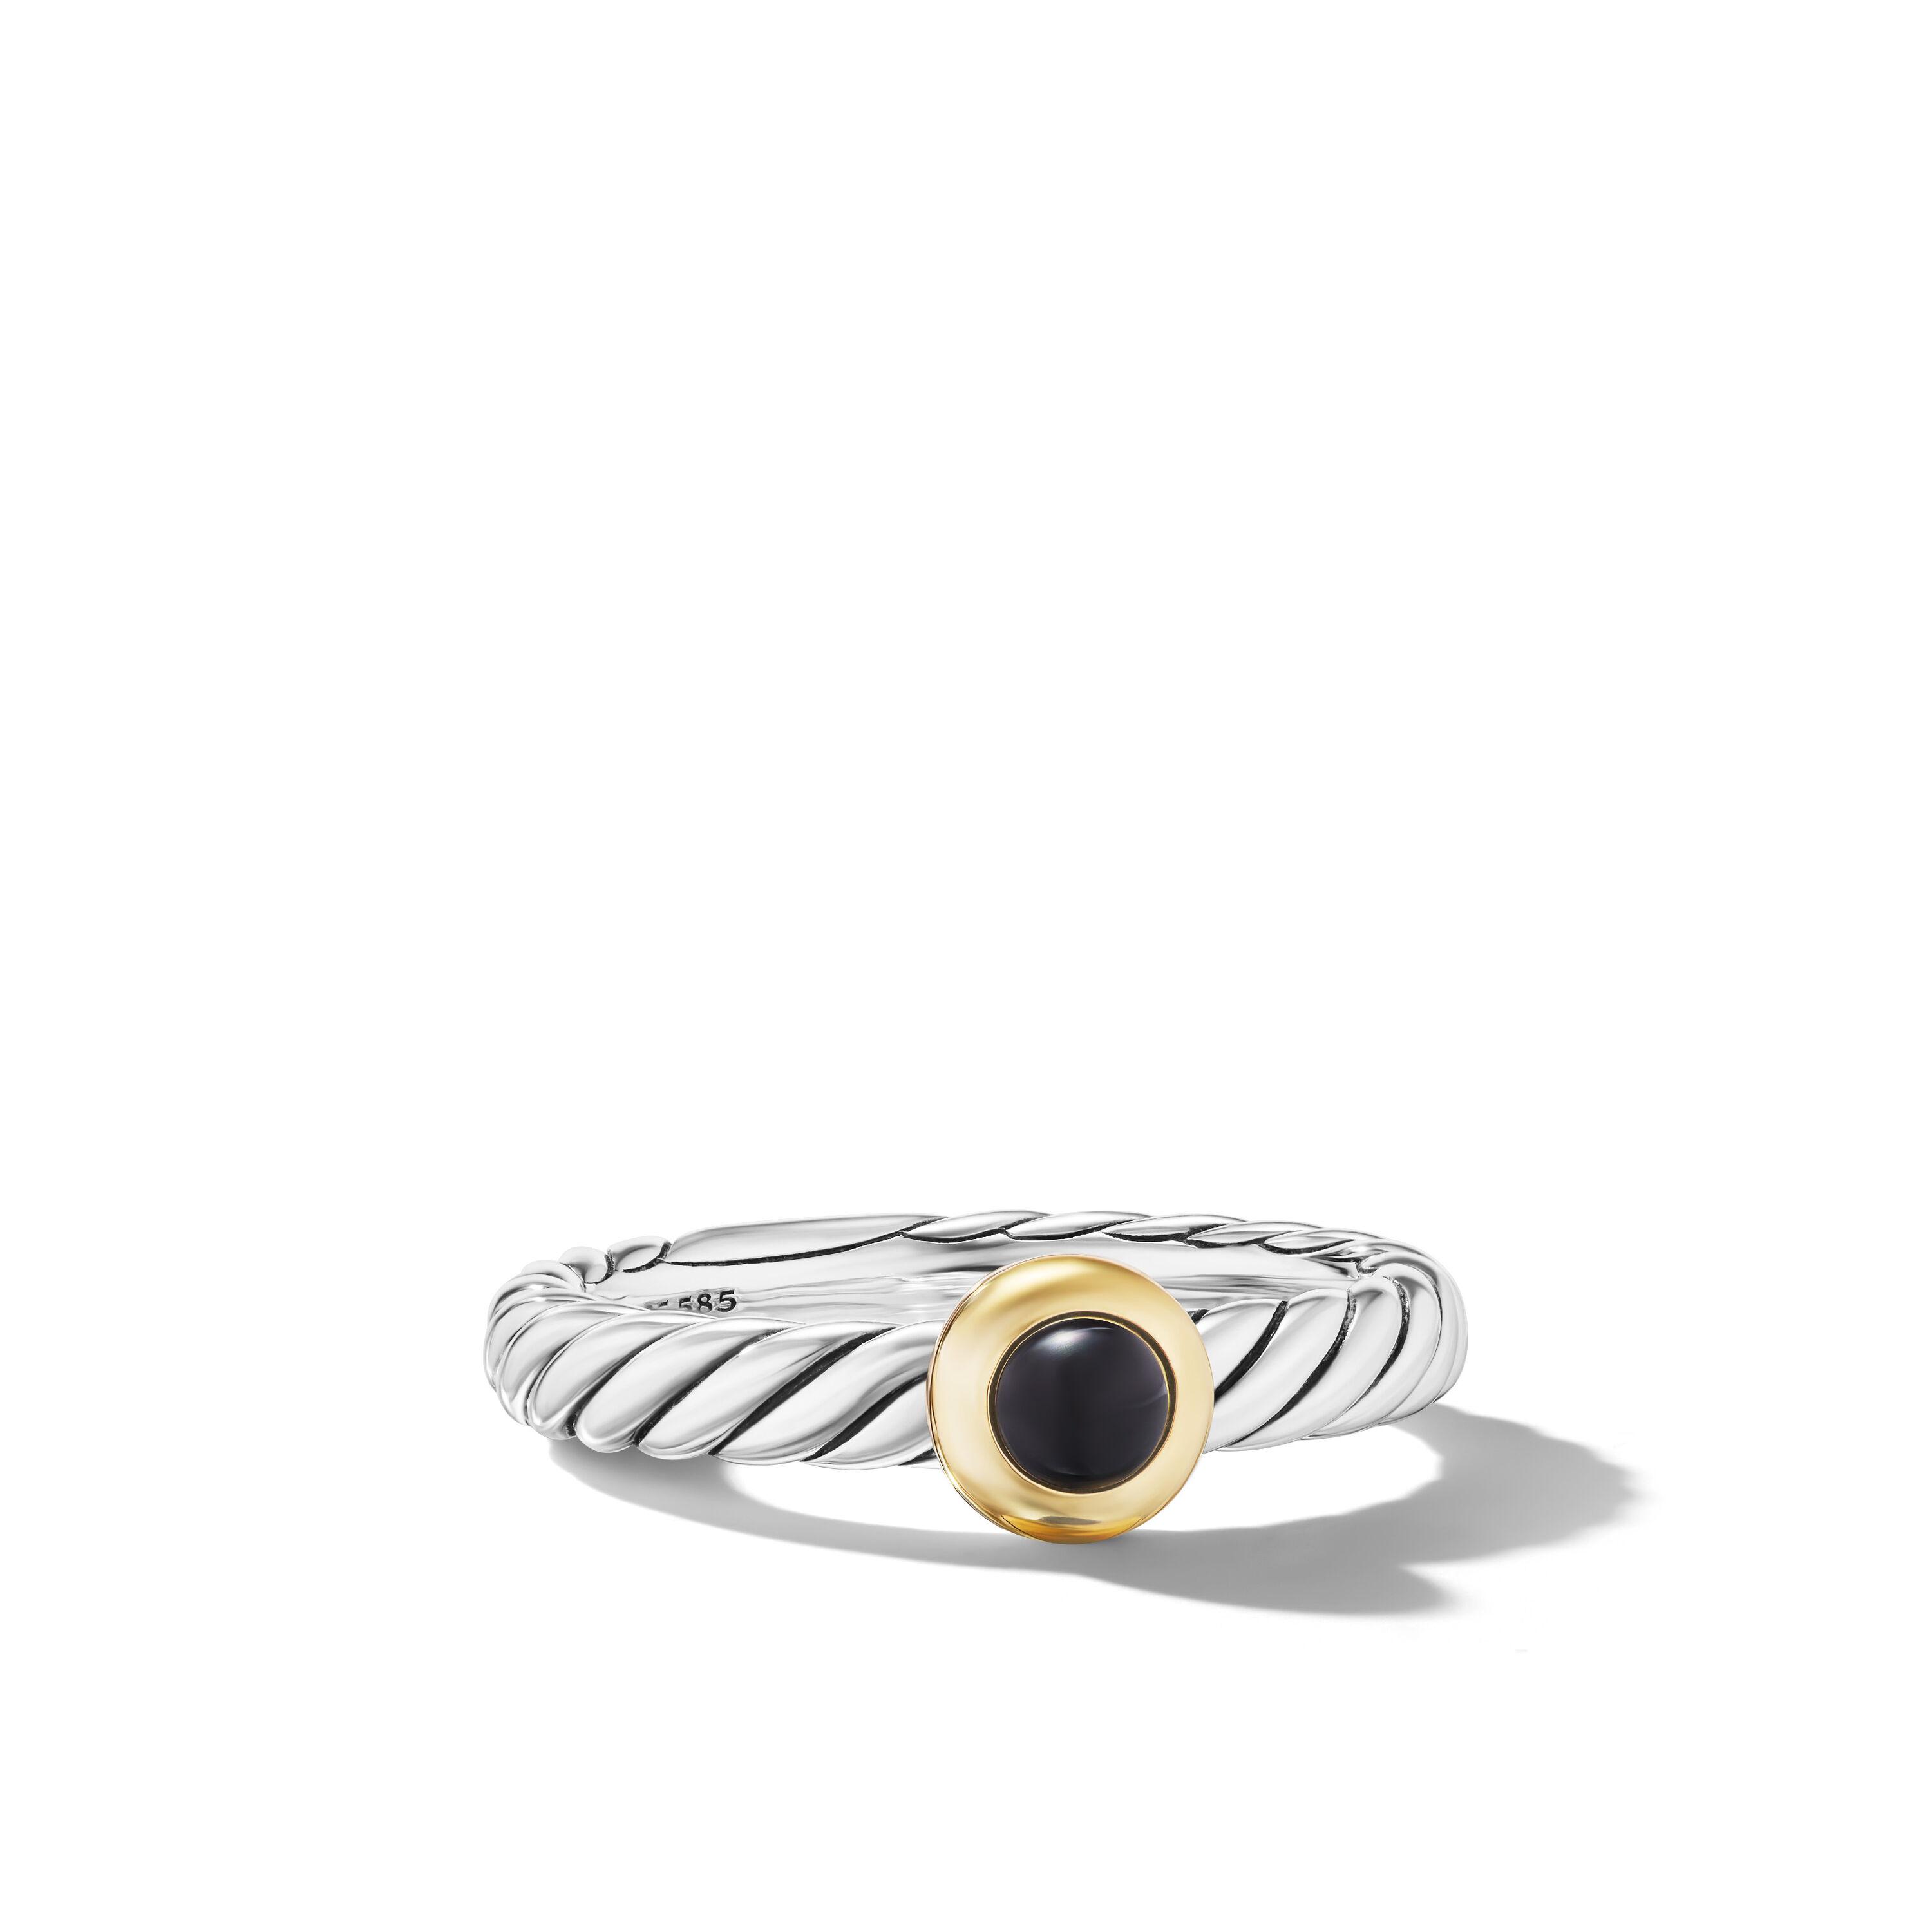 David Yurman Petite Cable Ring in Sterling Silver with 14K Yellow Gold and Black Onyx, Size 7 0